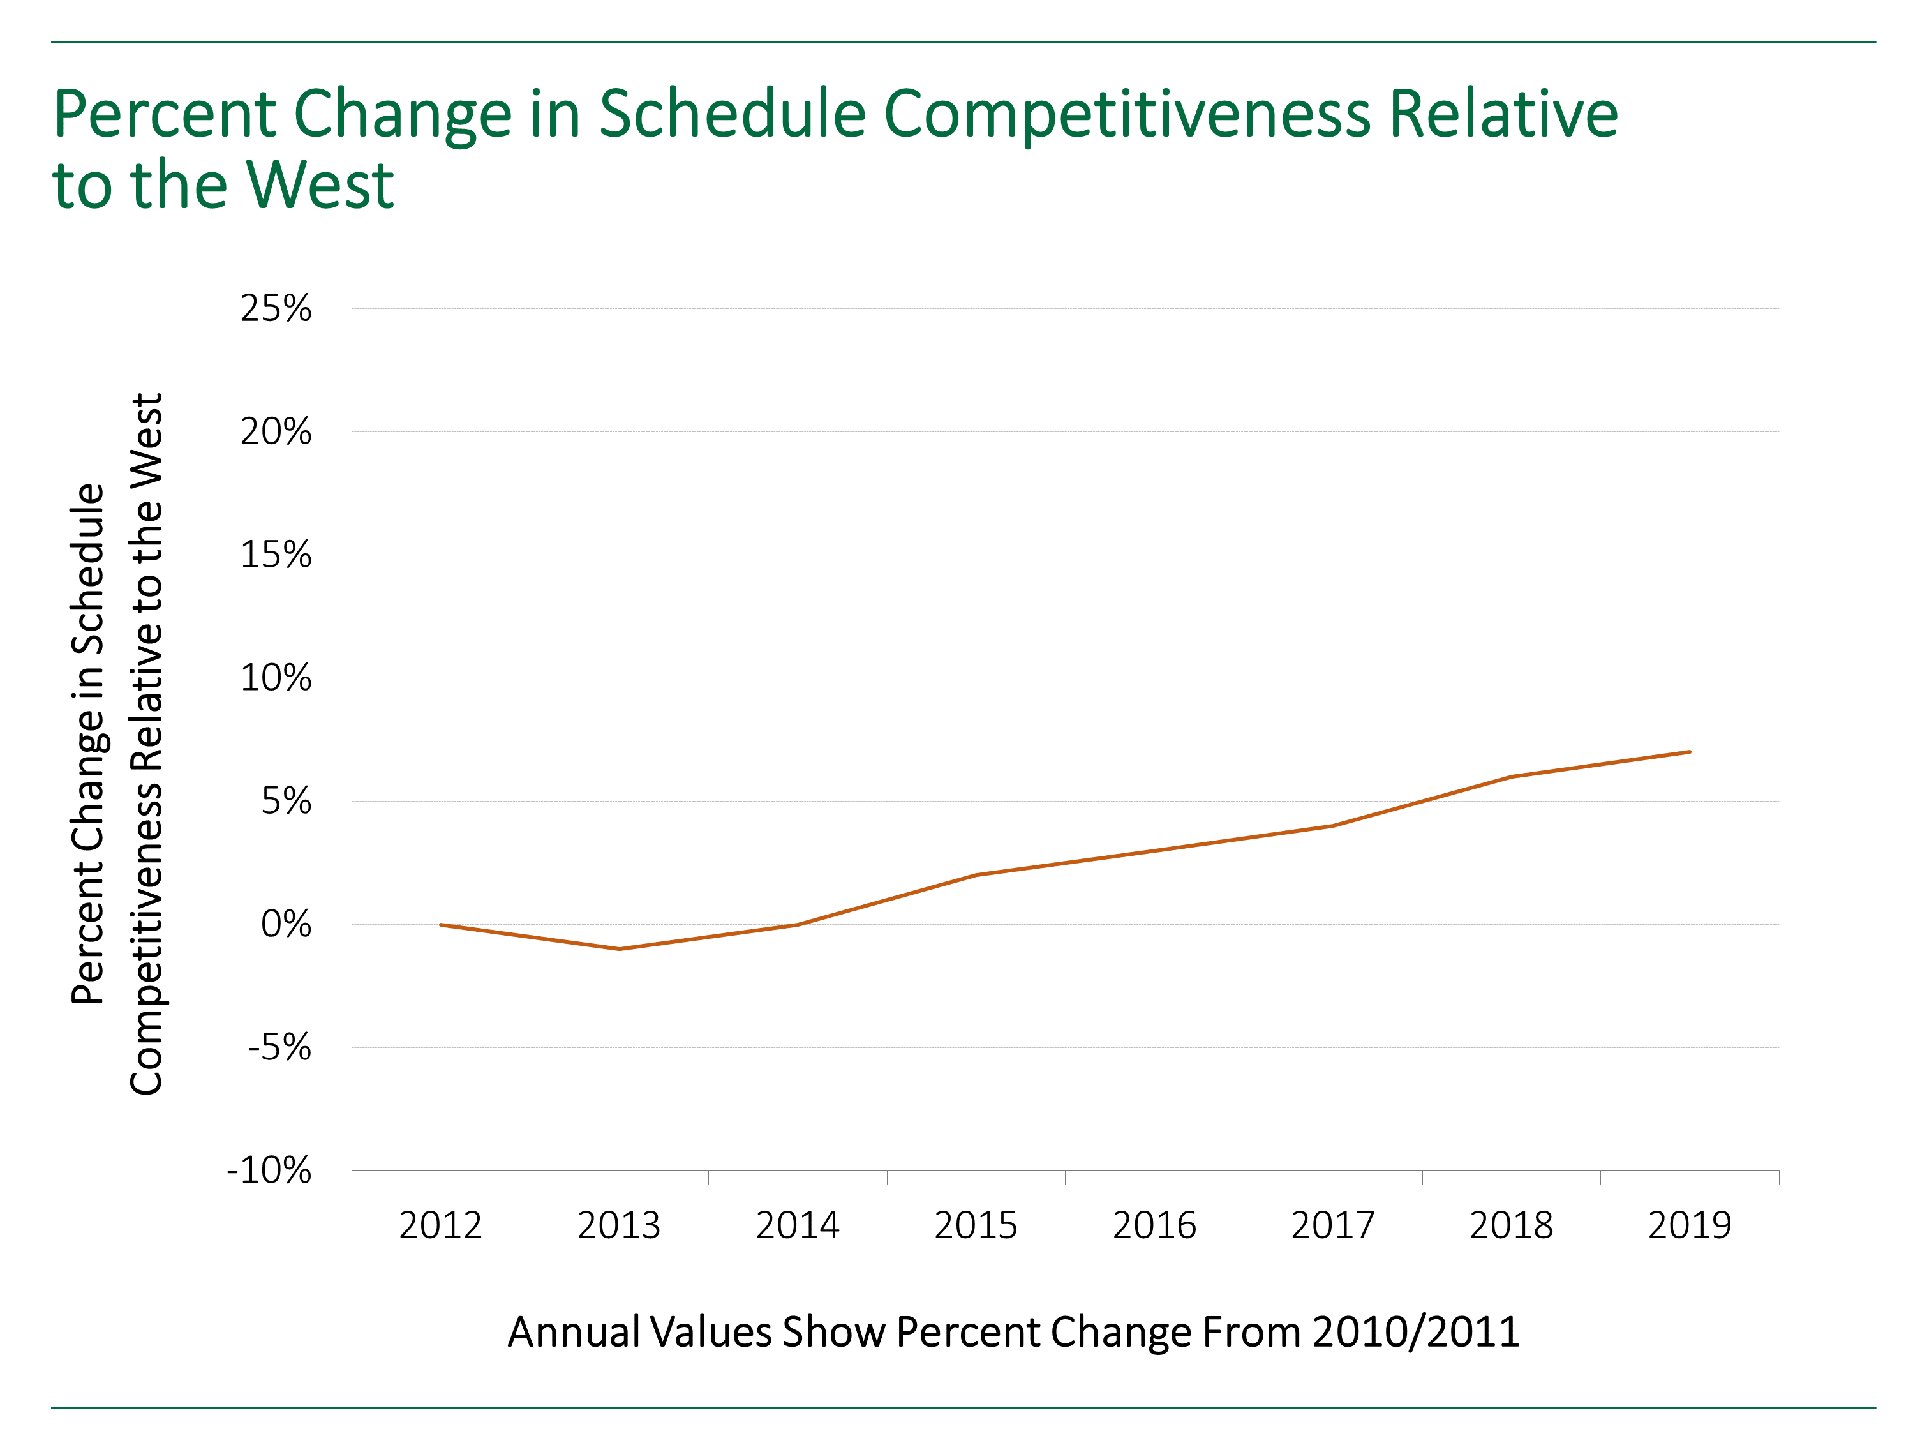 Line graph showing the percent change in schedule competitiveness for capital projects in China relative to the West .